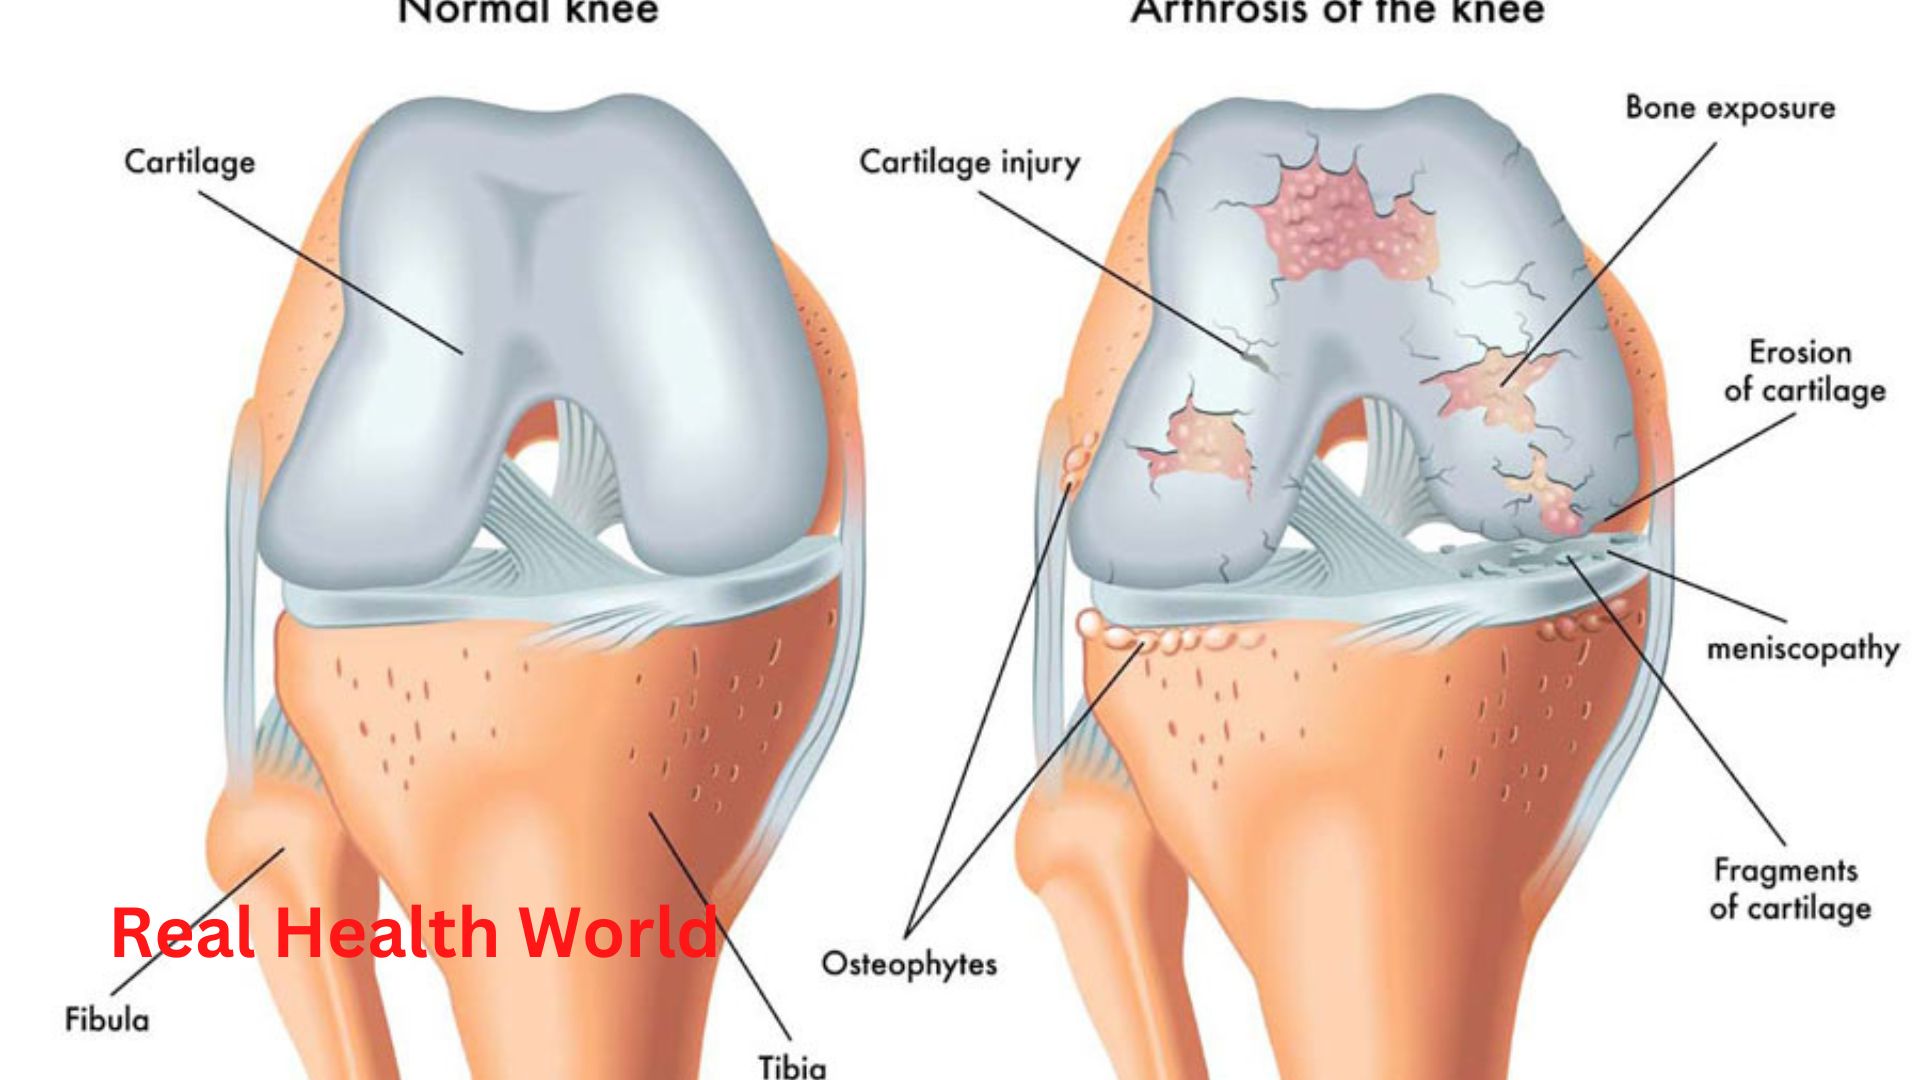 The role of physiotherapy in the treatment of osteoarthritis